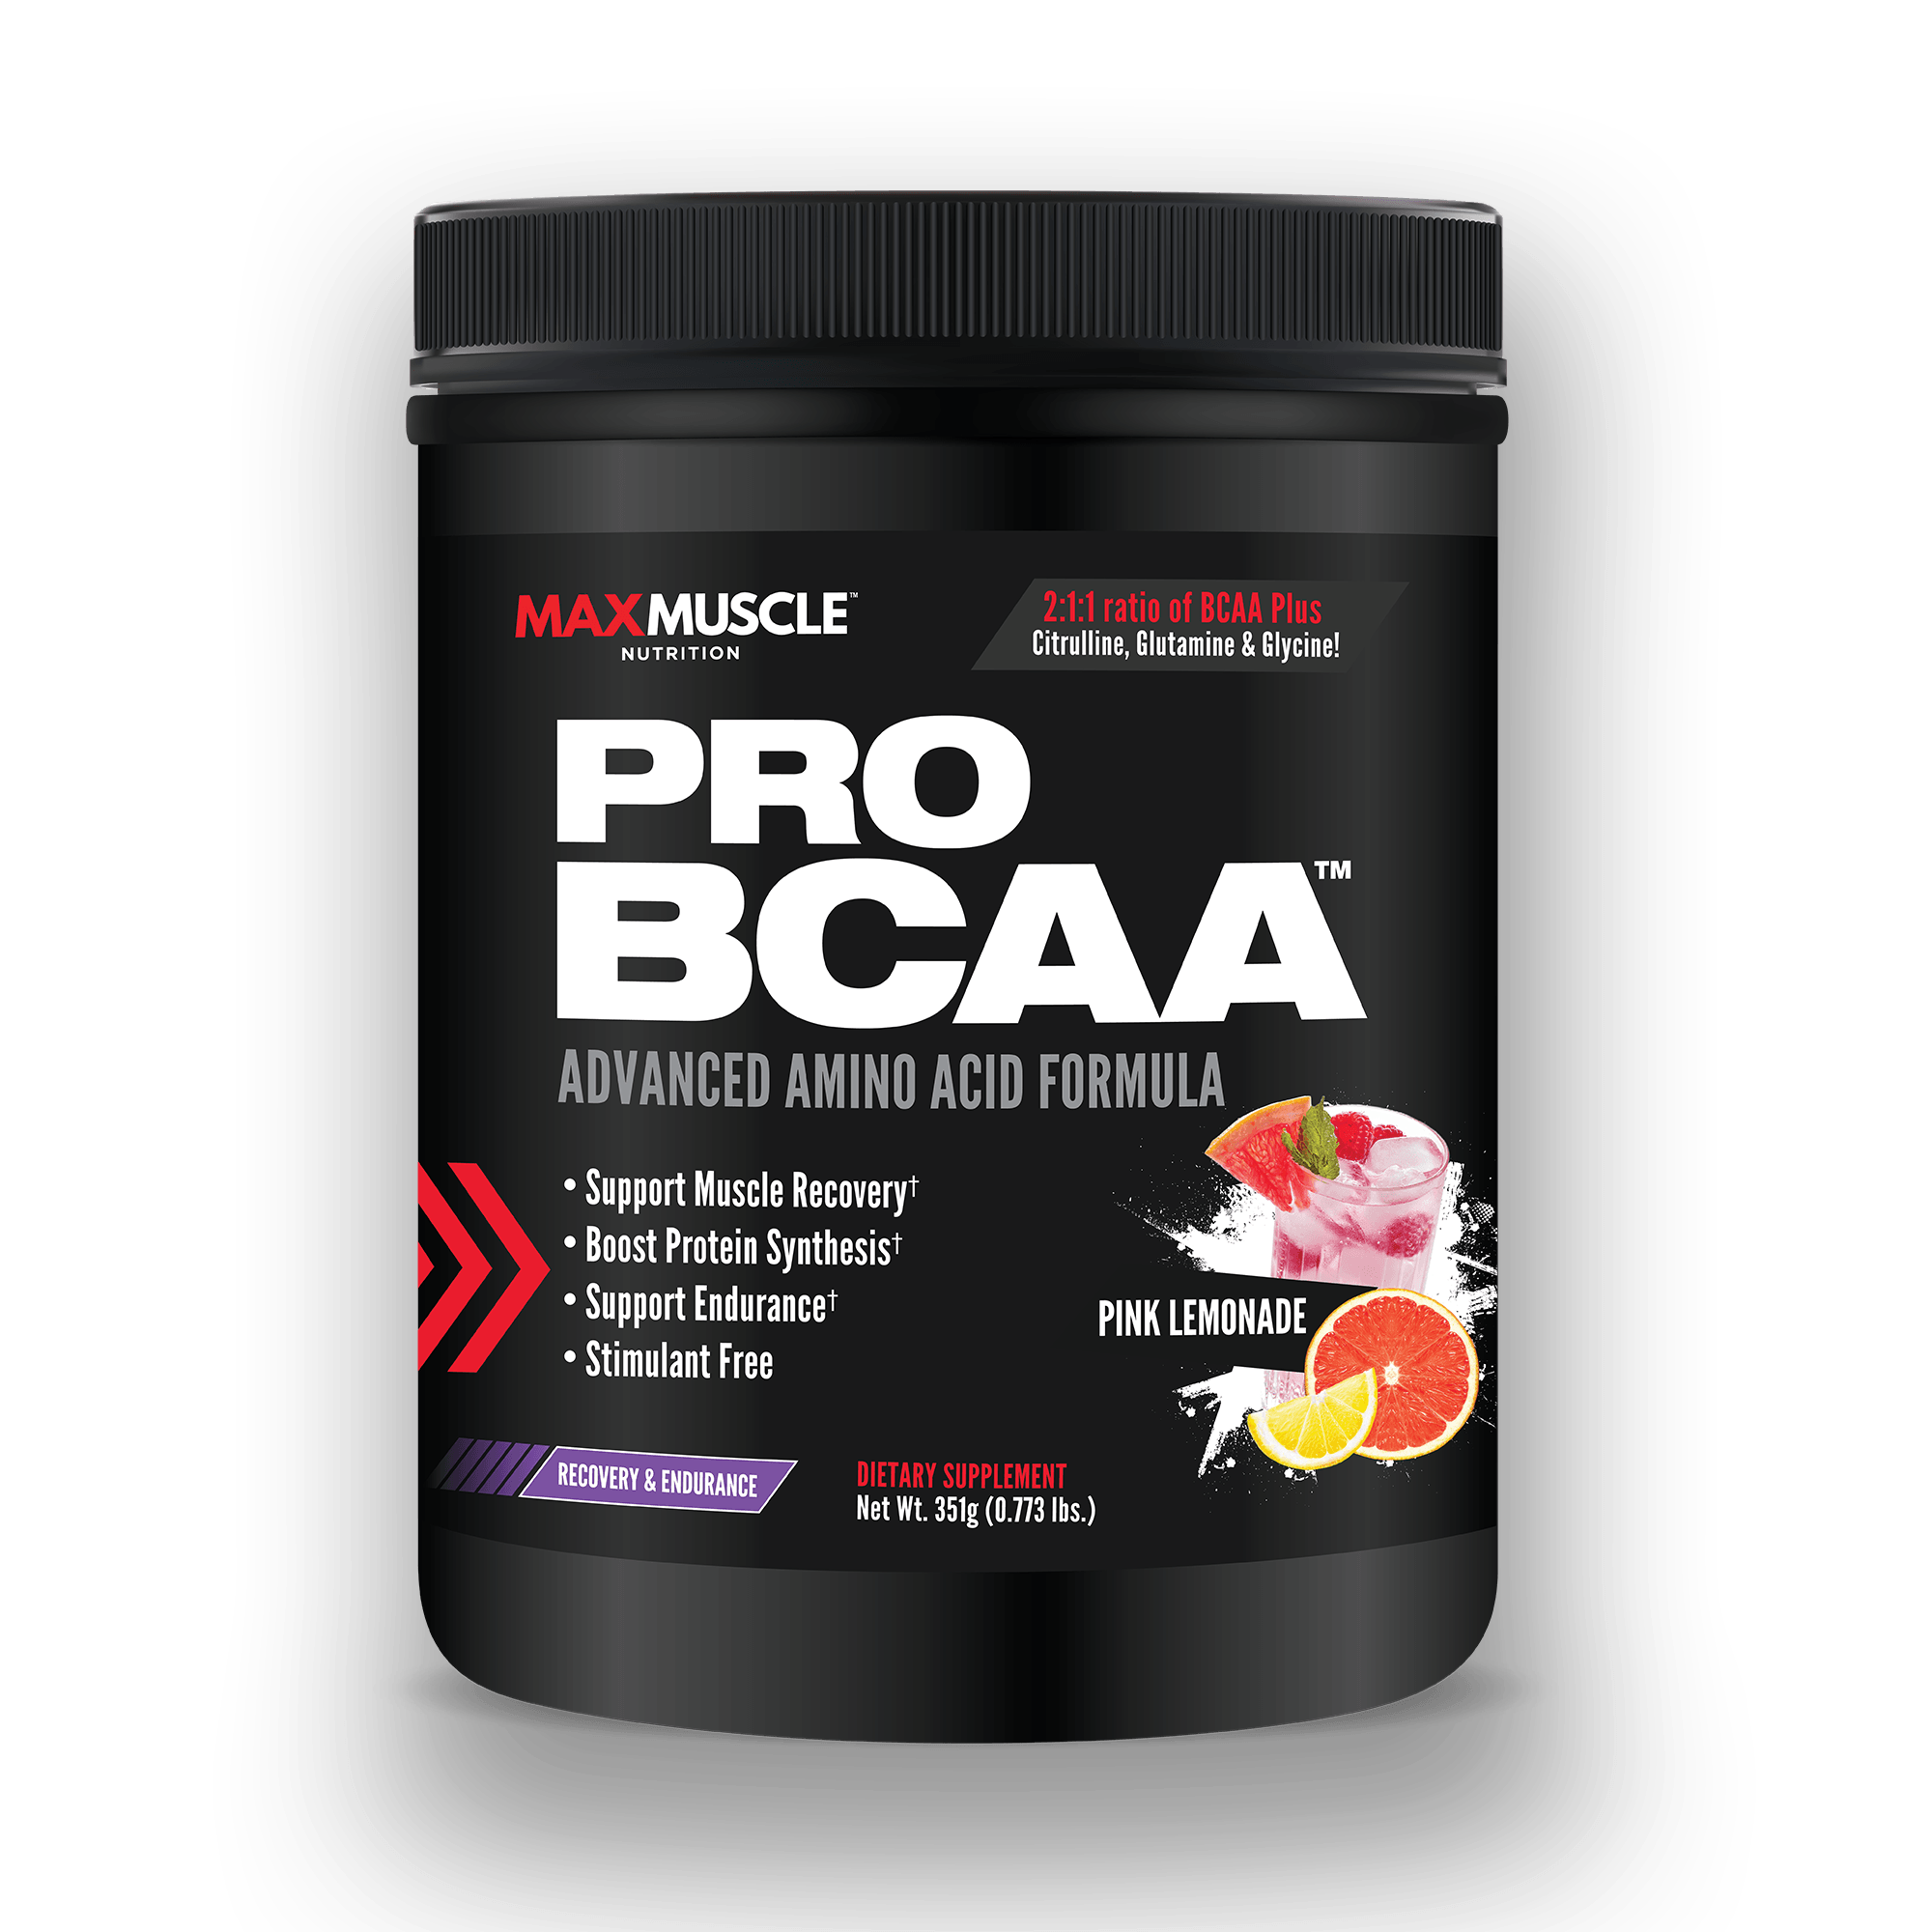 MACMUSCLE 2:1:1 ratio of BCAA Plus NUTRITION Bitrulline,lutamine Glycine! T A LTI * Boost Protein Synthesist T AT TN o TR Net Wt. 351g 0.7 Ibs 